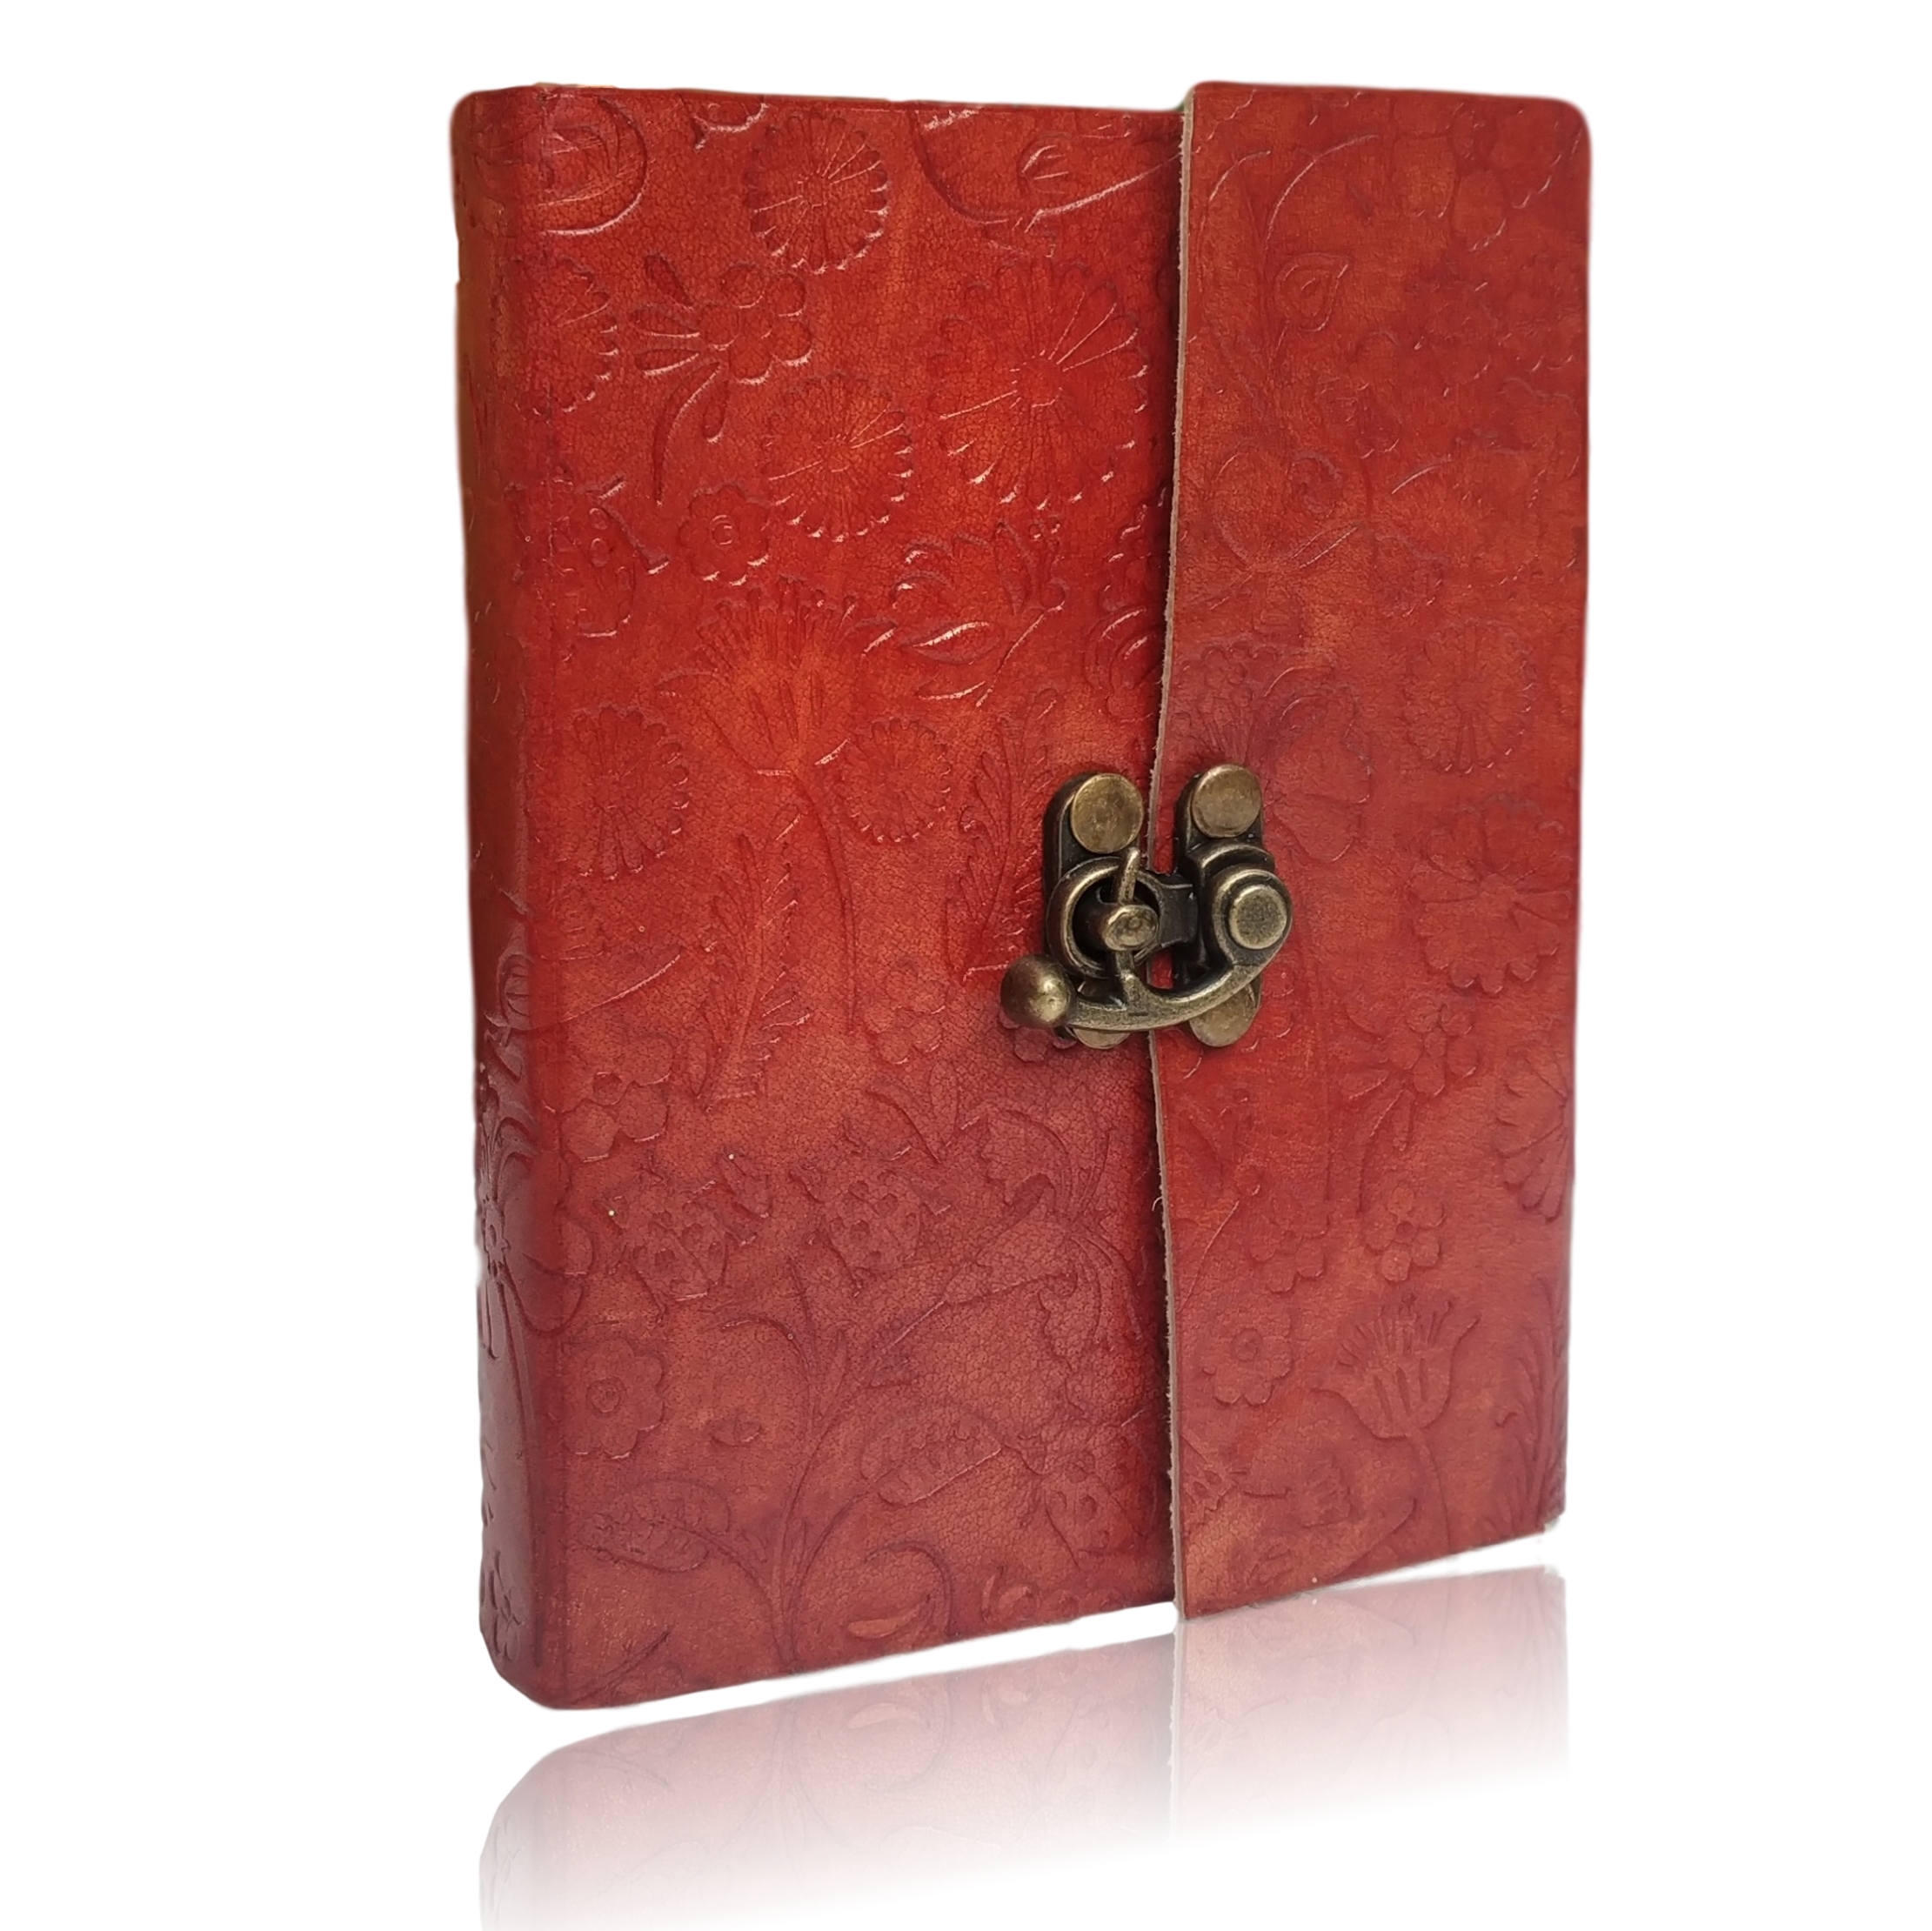 Real leather vintage journal – Burnt Paper Edges Limited Edition – LEAFERS : Perfect Gift for Teens, Men, Women, Artists on Valentine’s Day, 200 Pages – Handmade Travel Diary, Writing, Drawing, Poetry Giveaway